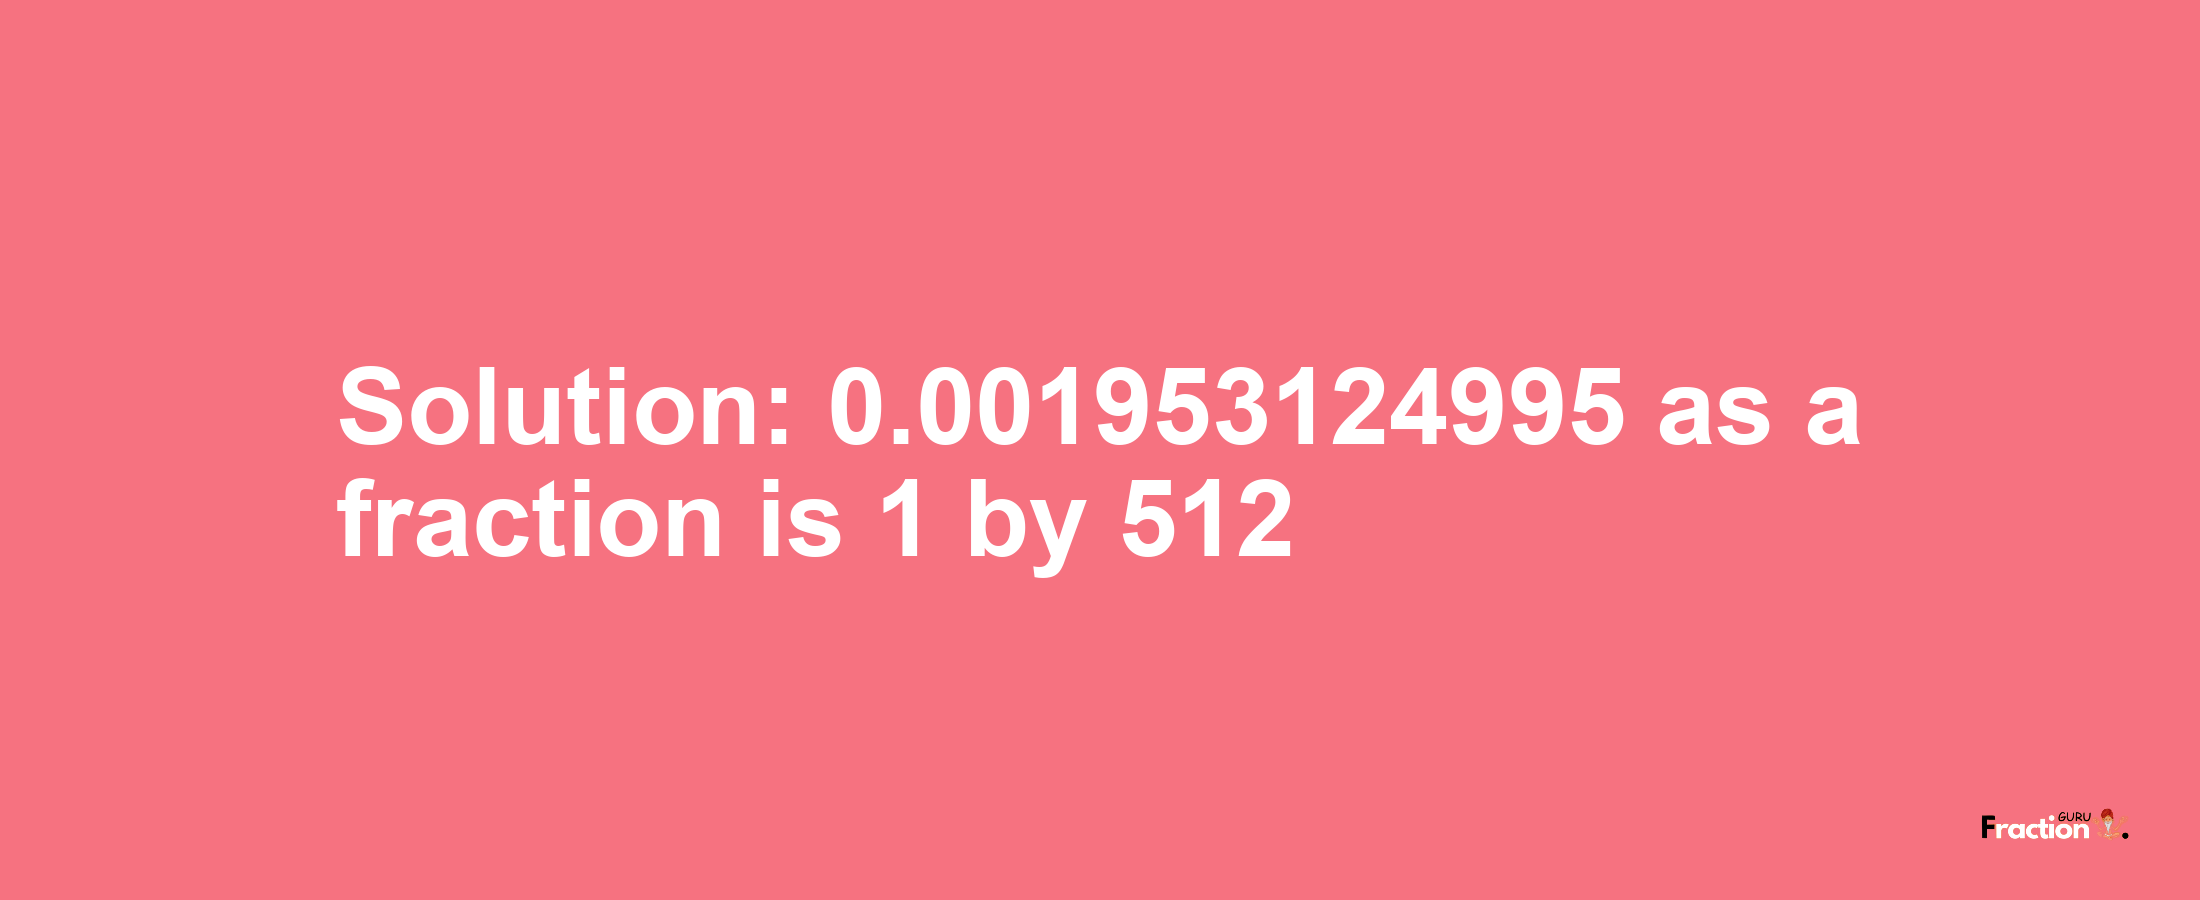 Solution:0.001953124995 as a fraction is 1/512